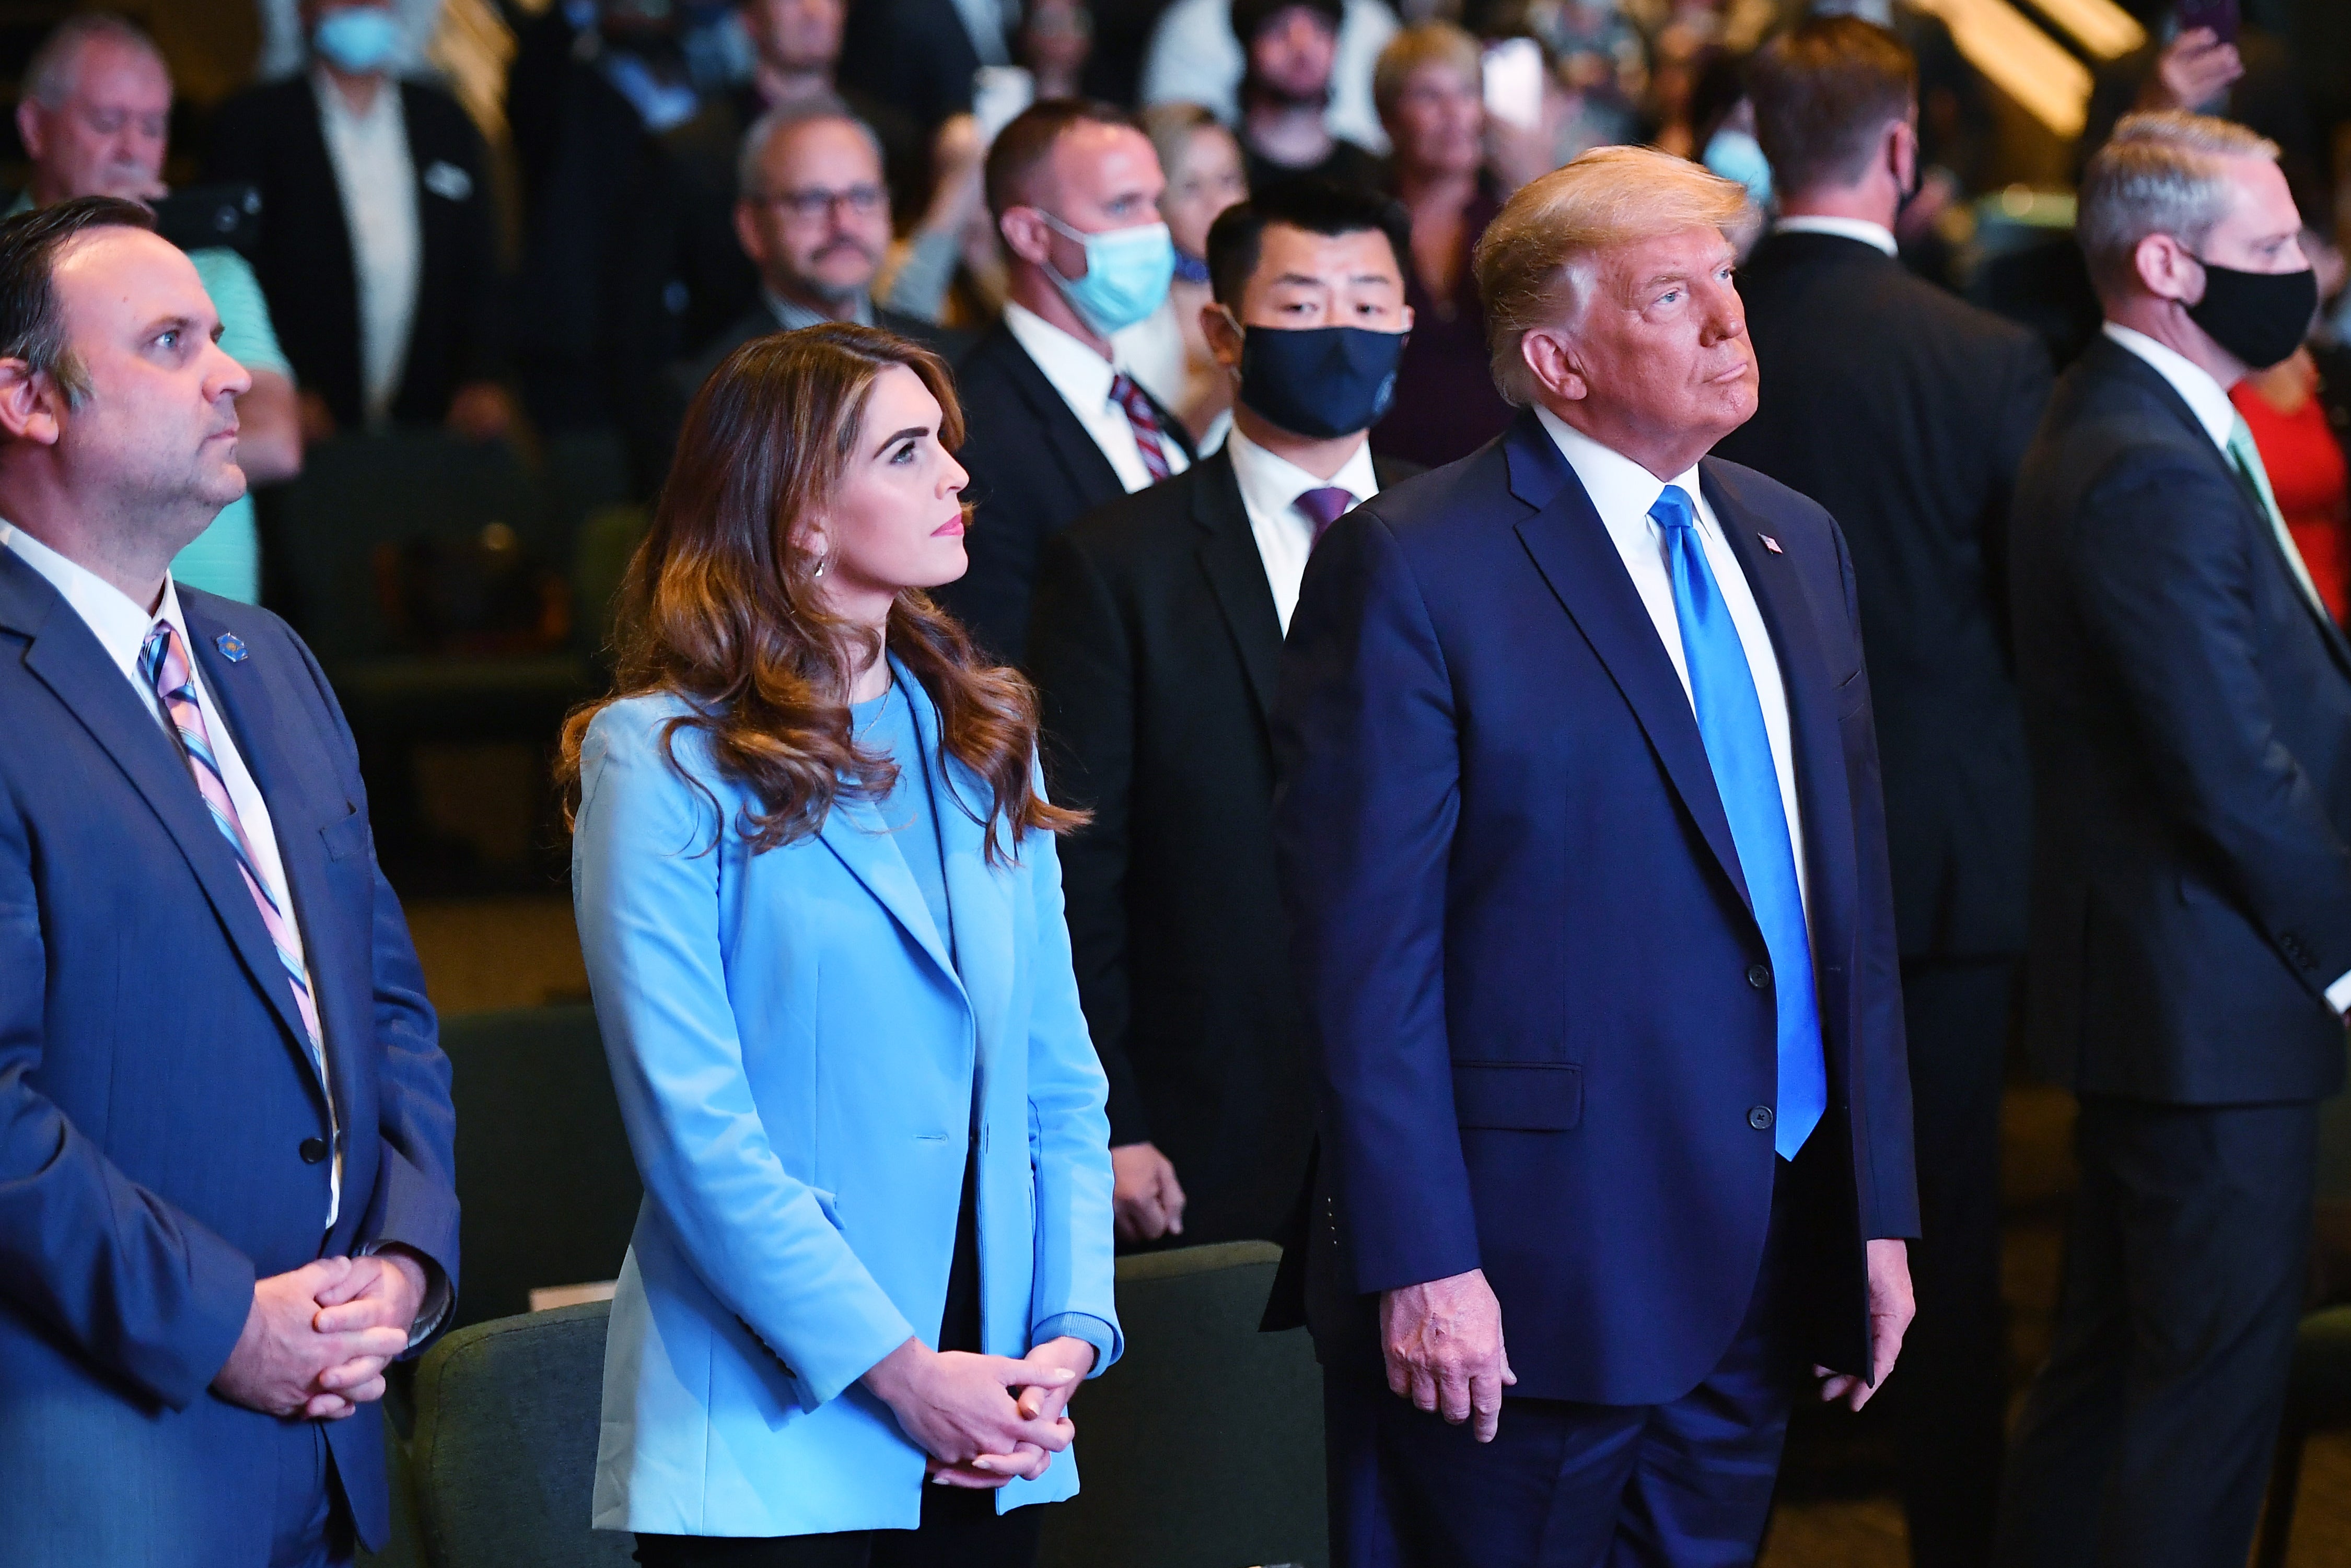 Hope Hicks, senior adviser to the president, and White House Deputy Chief of Staff for Communications Dan Scavino(L) attend services with US President Donald Trump at the International Church of Las Vegas in Las Vegas, Nevada, on October 18, 2020.